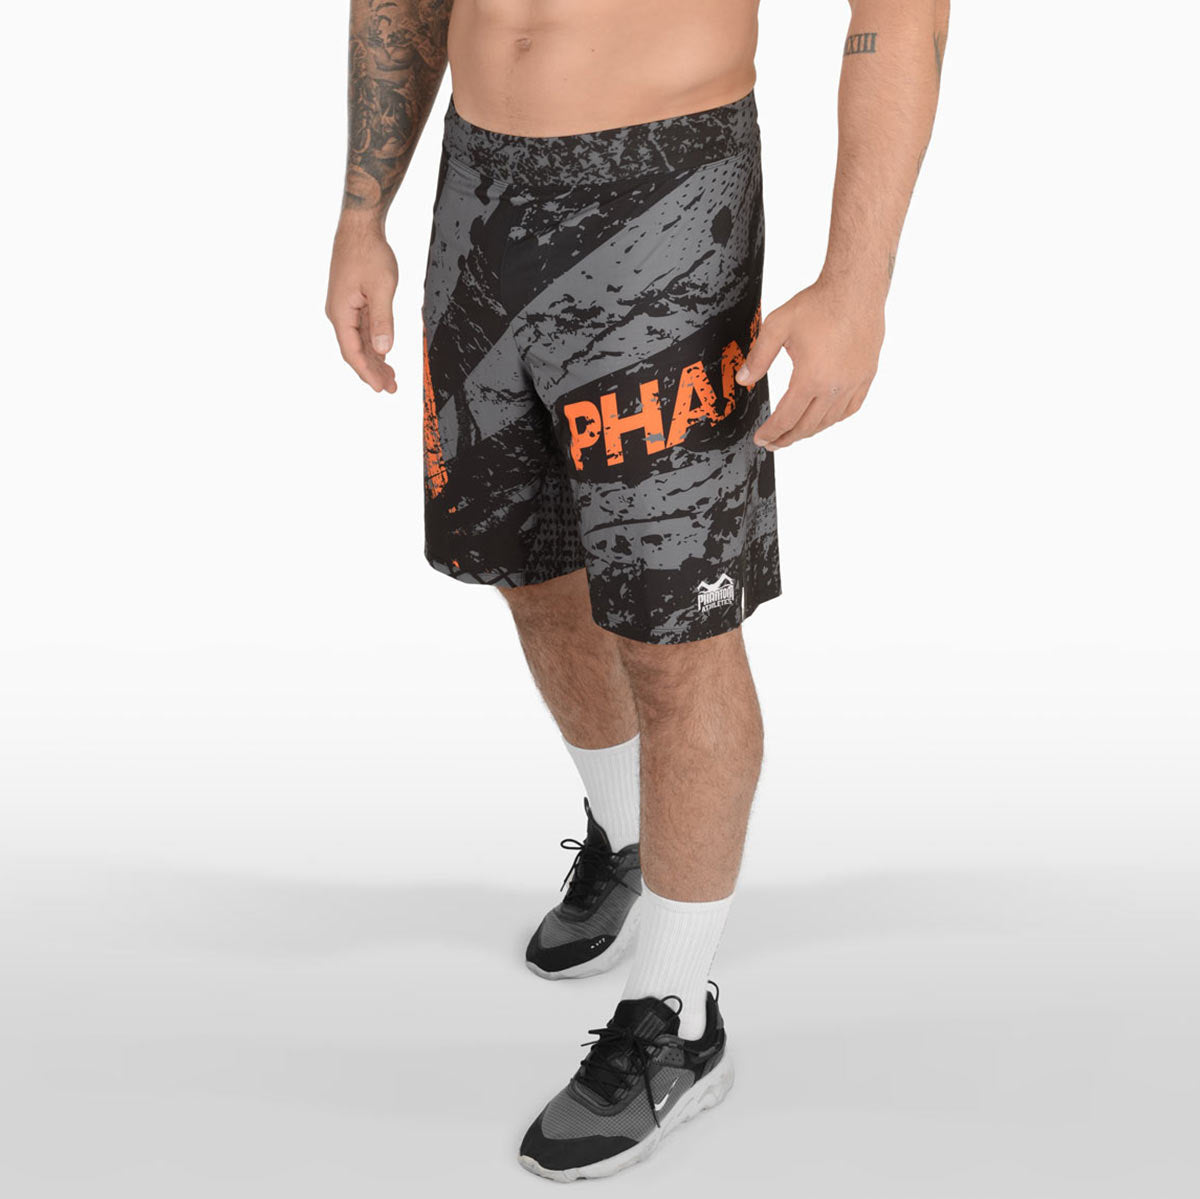 The Phantom FLEX fight shorts are among the best fight shorts on the market. Ultralight, extremely flexible and tear-resistant. Reduced to an absolute minimum, it offers you maximum performance in your martial arts. No matter whether BJJ, MMA, Muay Thai or kickboxing. The FLEX shorts from Phantom Athletics bring out the best in you. Here in the orange splatter design.